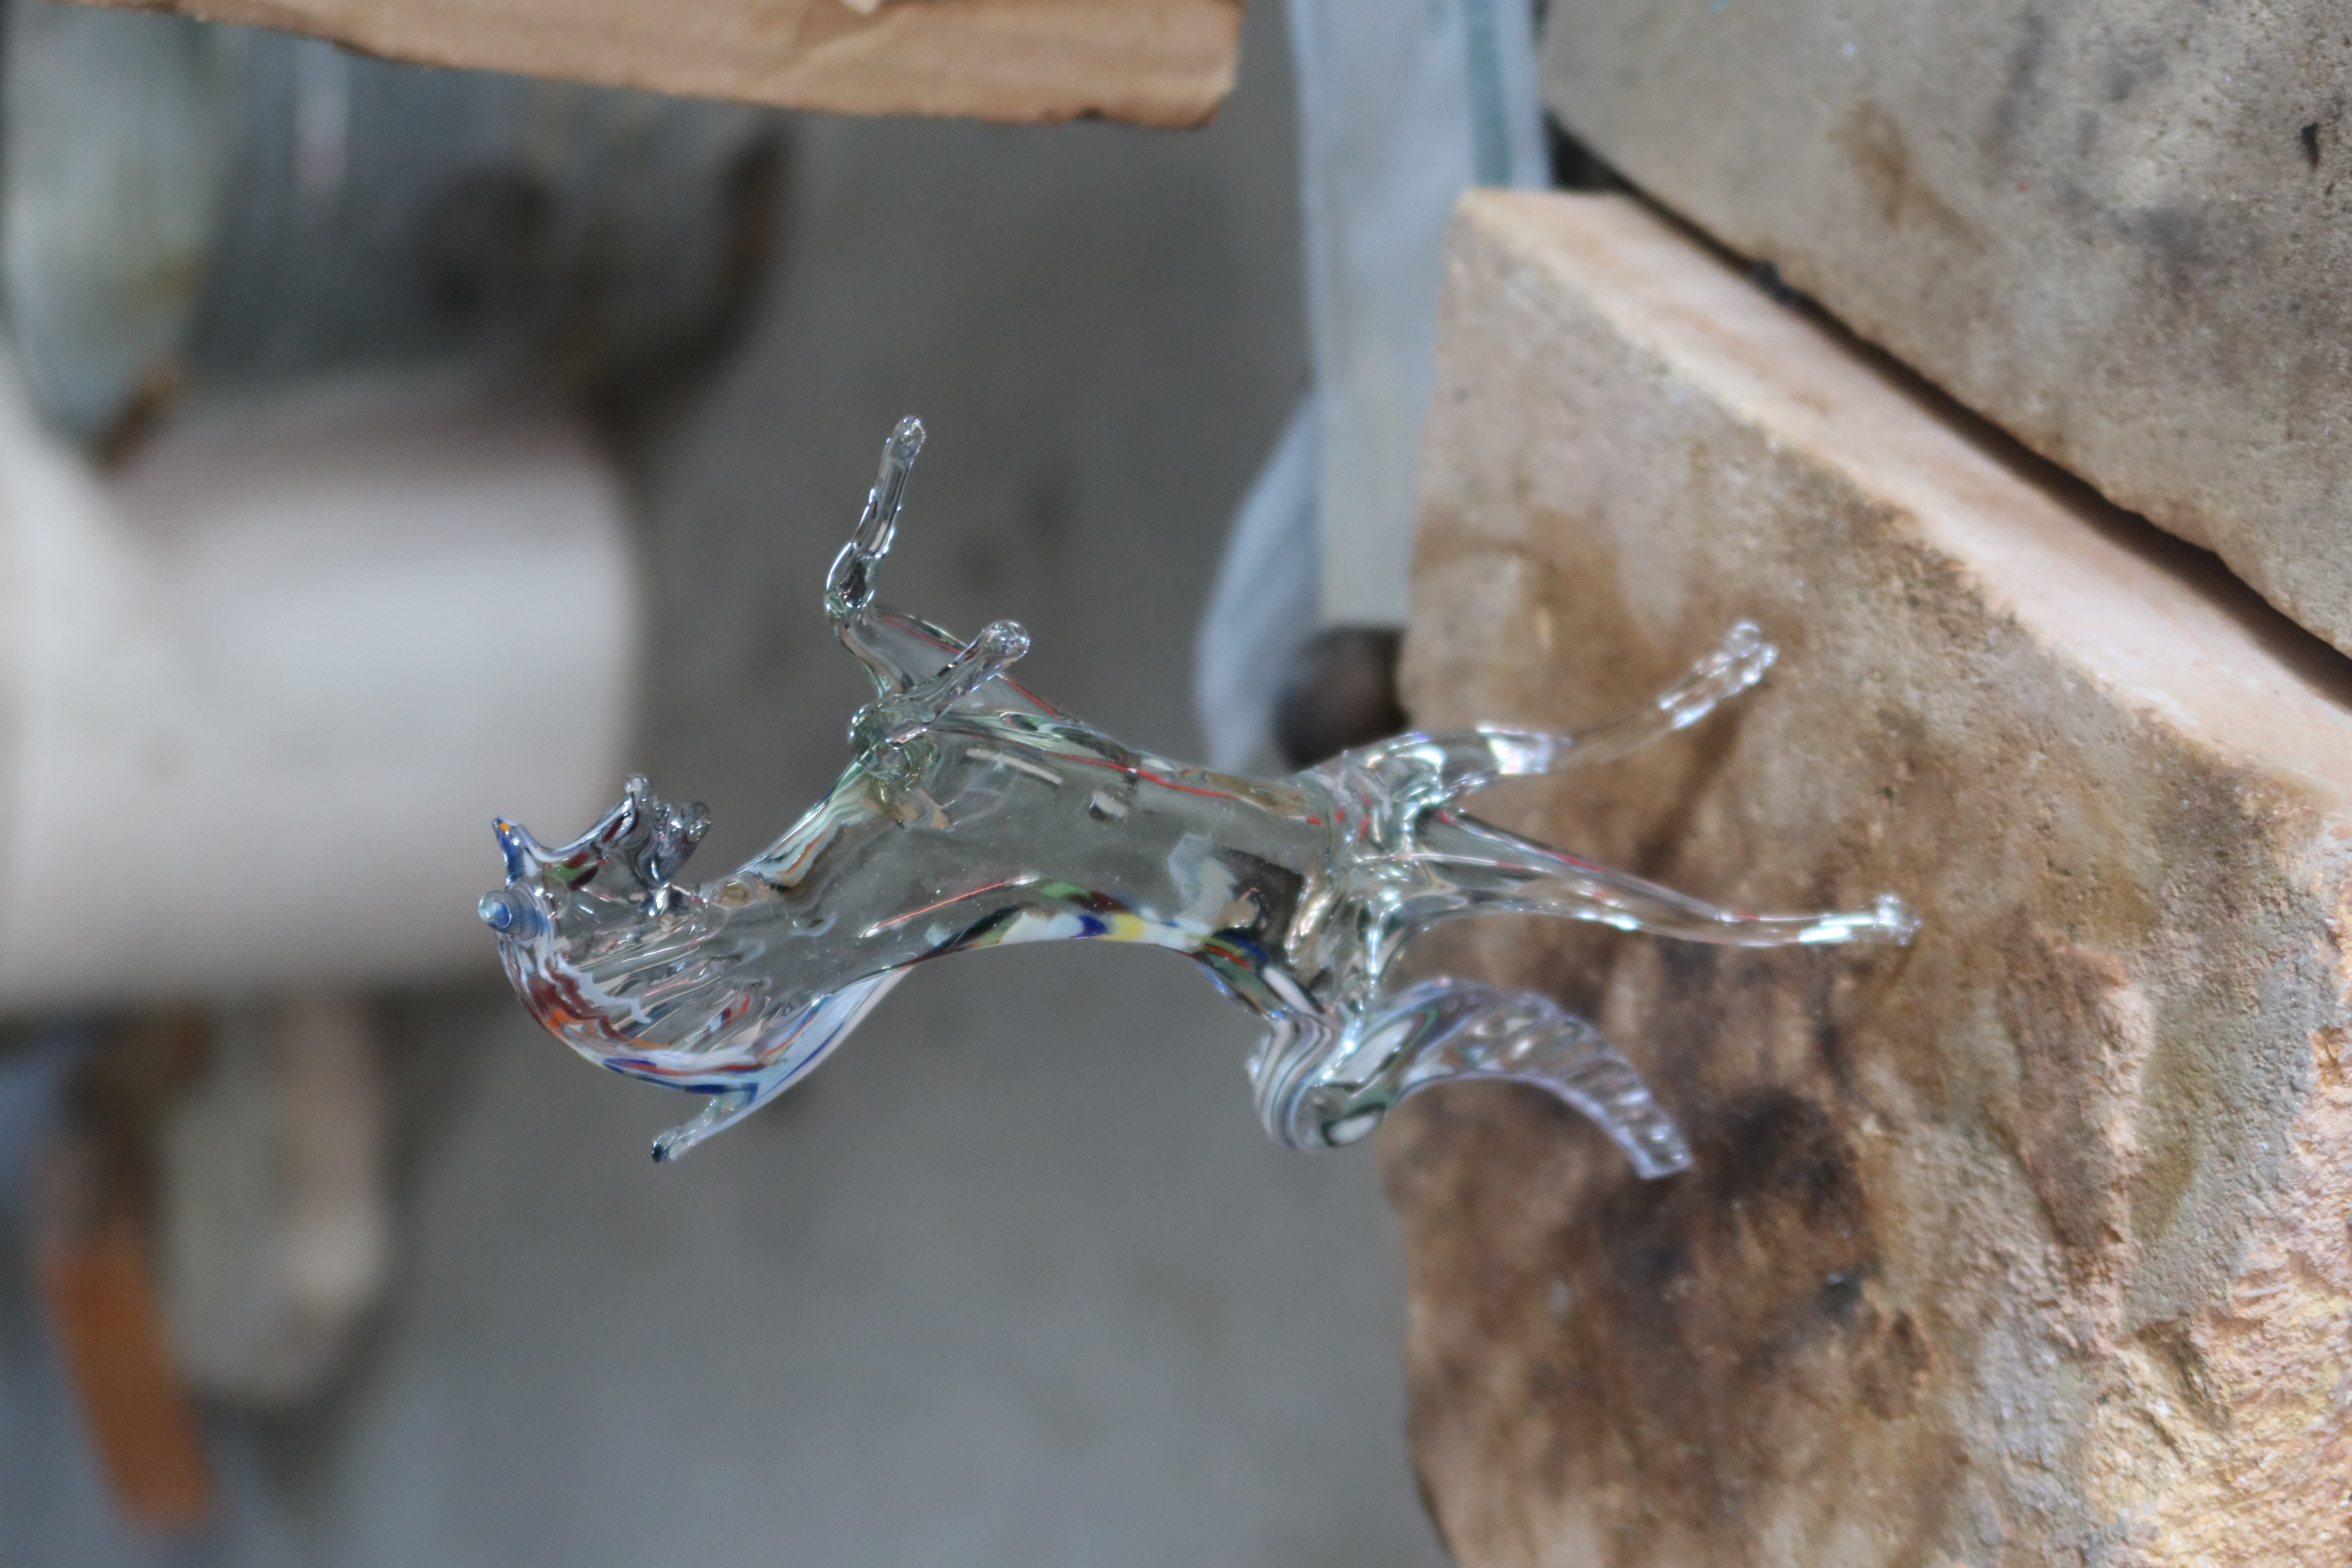 Murano Glass Demonstration Horse - One Weekend in Venice with Kids